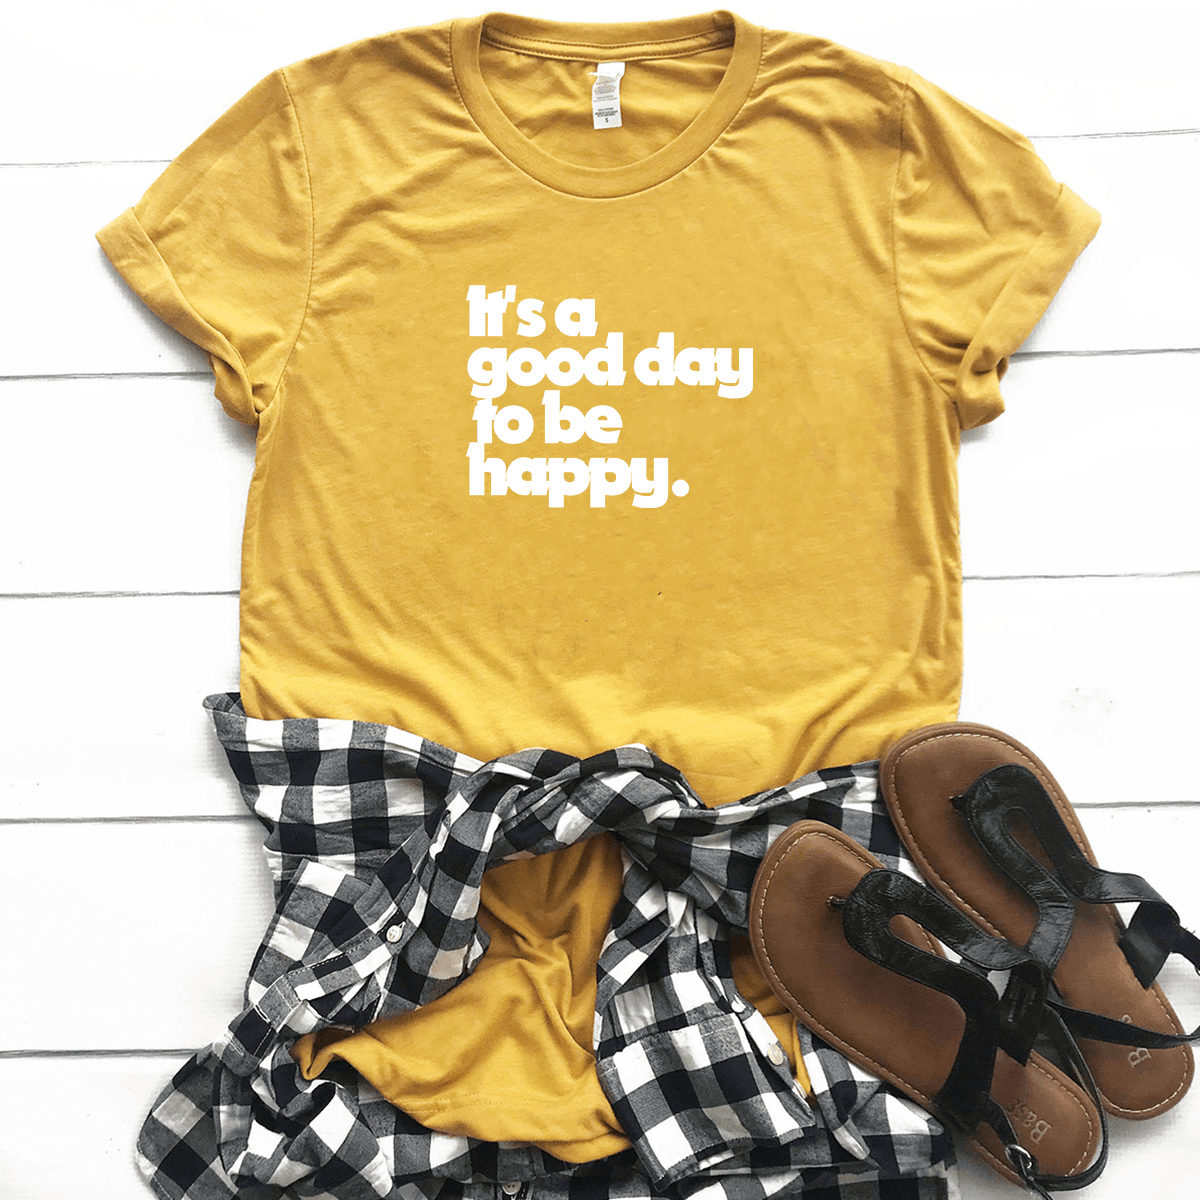 It's a Good Day to be Happy - Bella+Canvas Tee